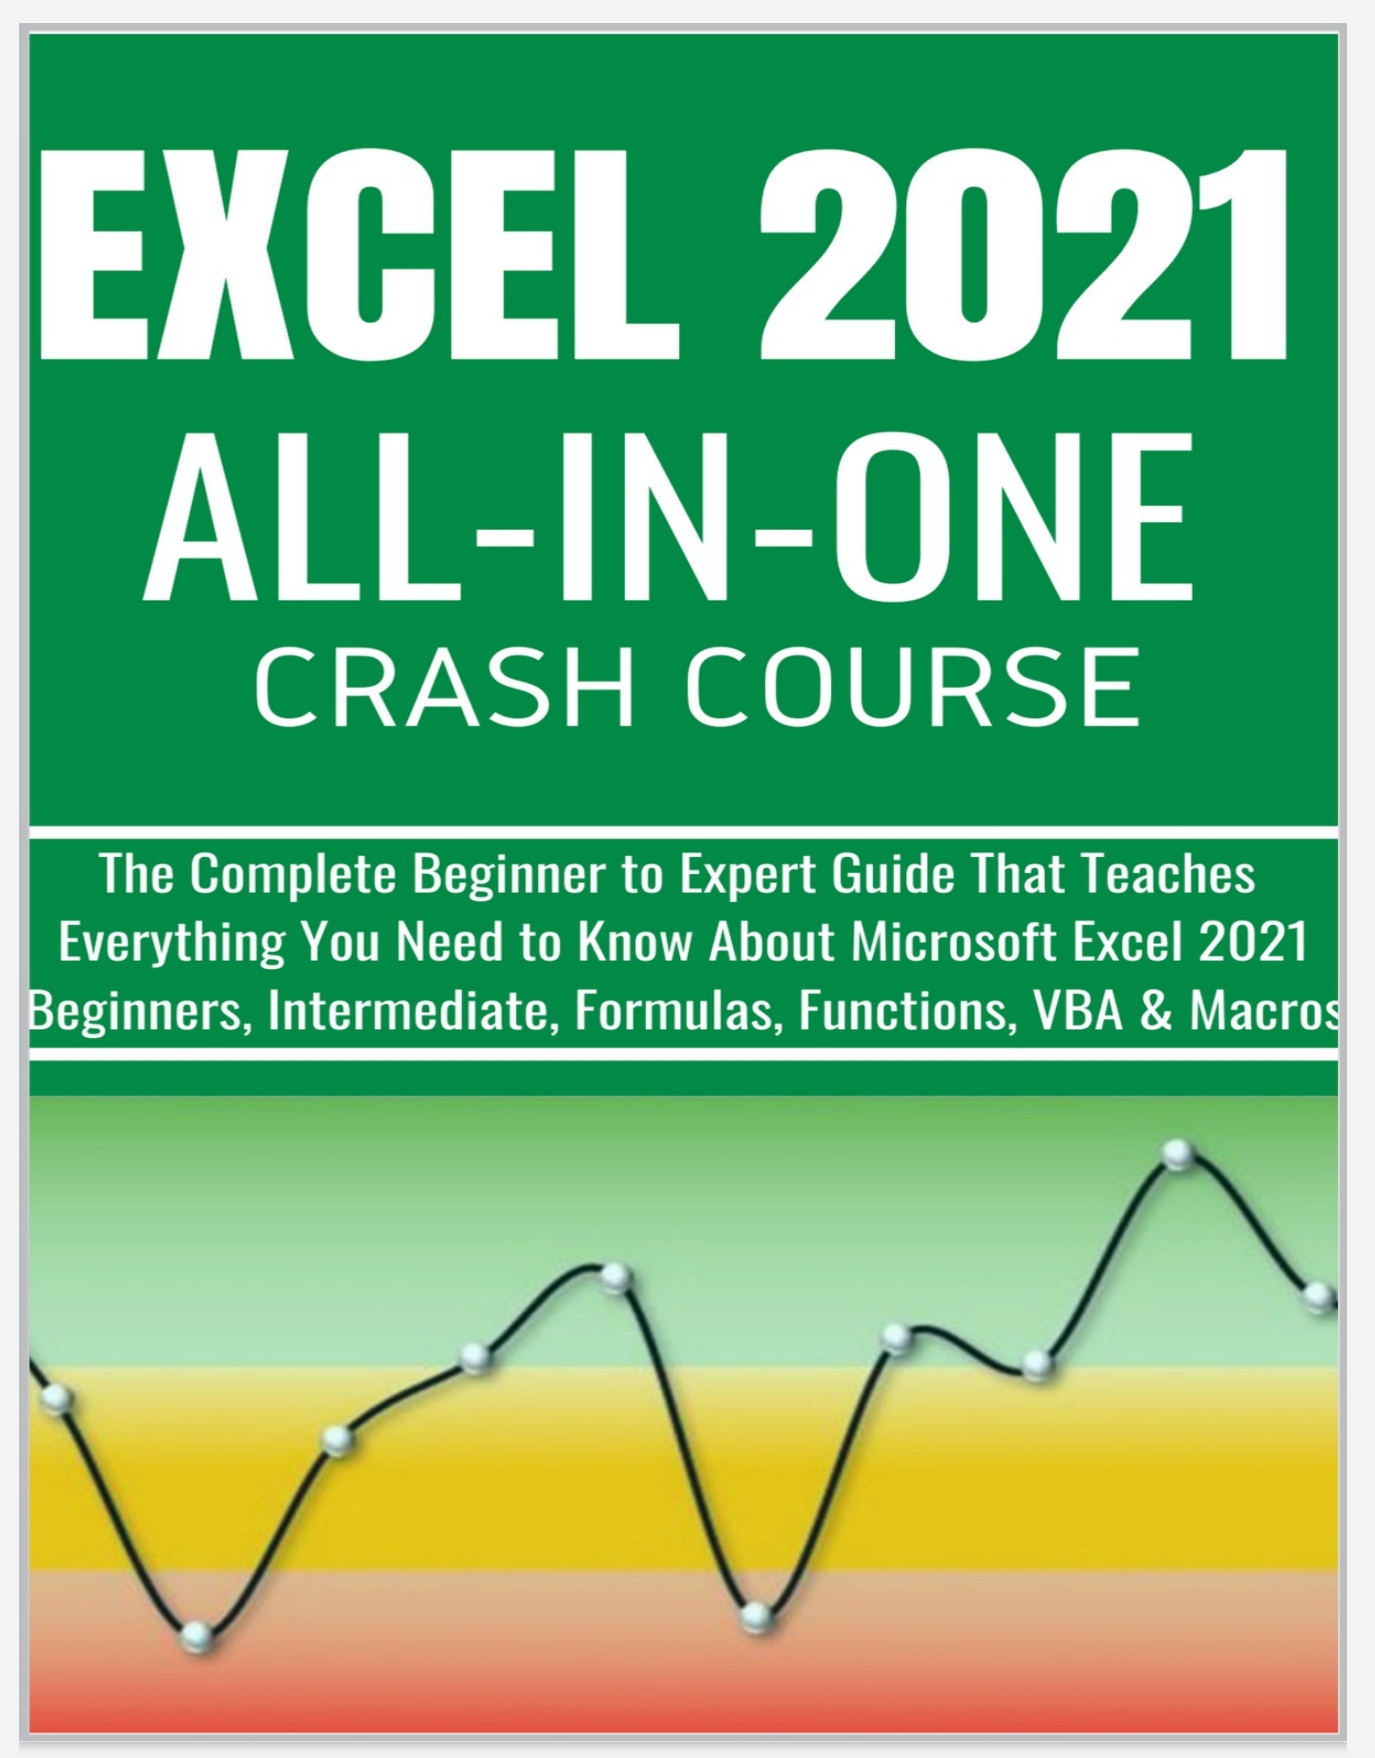 EXCEL 2021 ALL-IN-ONE: The Complete Beginner to Expert Guide That Teaches Everything You Need to Know About Microsoft Excel 2021